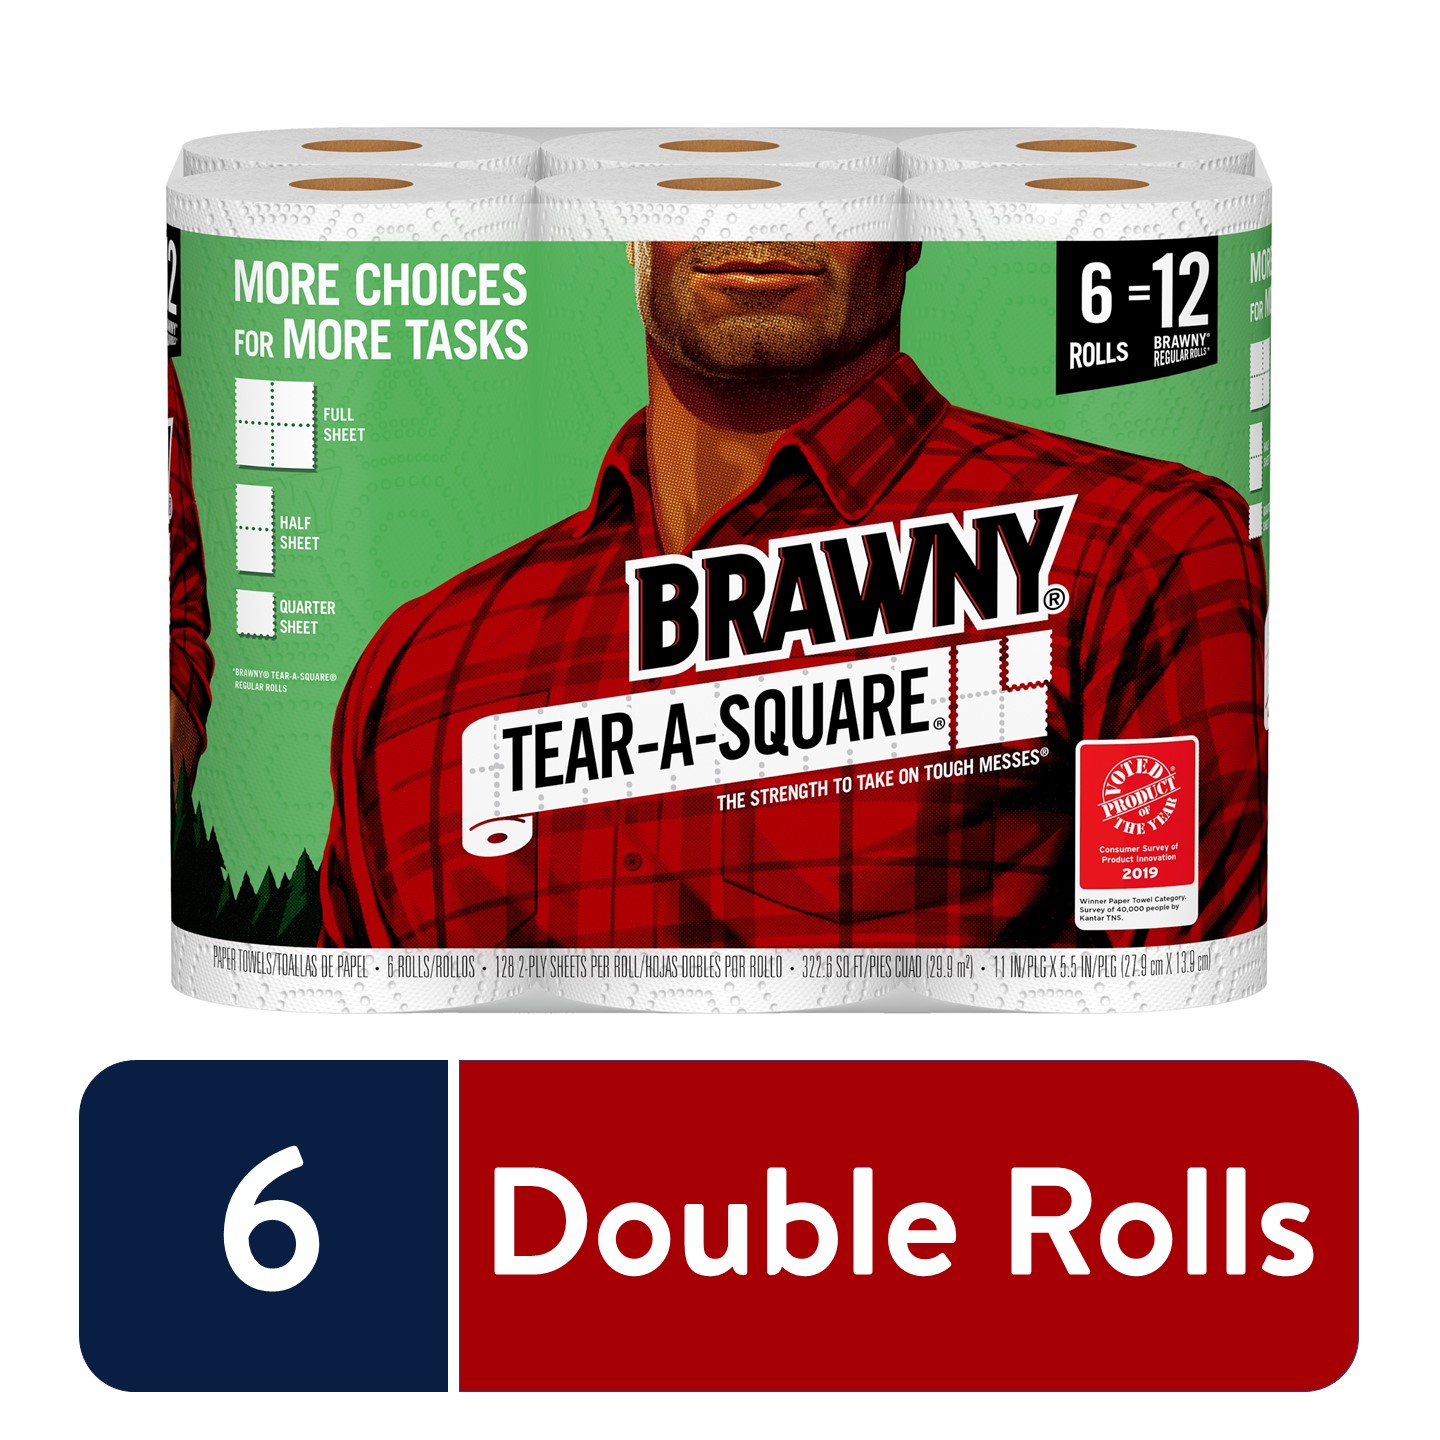 Brawny Tear-A-Square Paper Towels, 6 Double Rolls - image 1 of 12